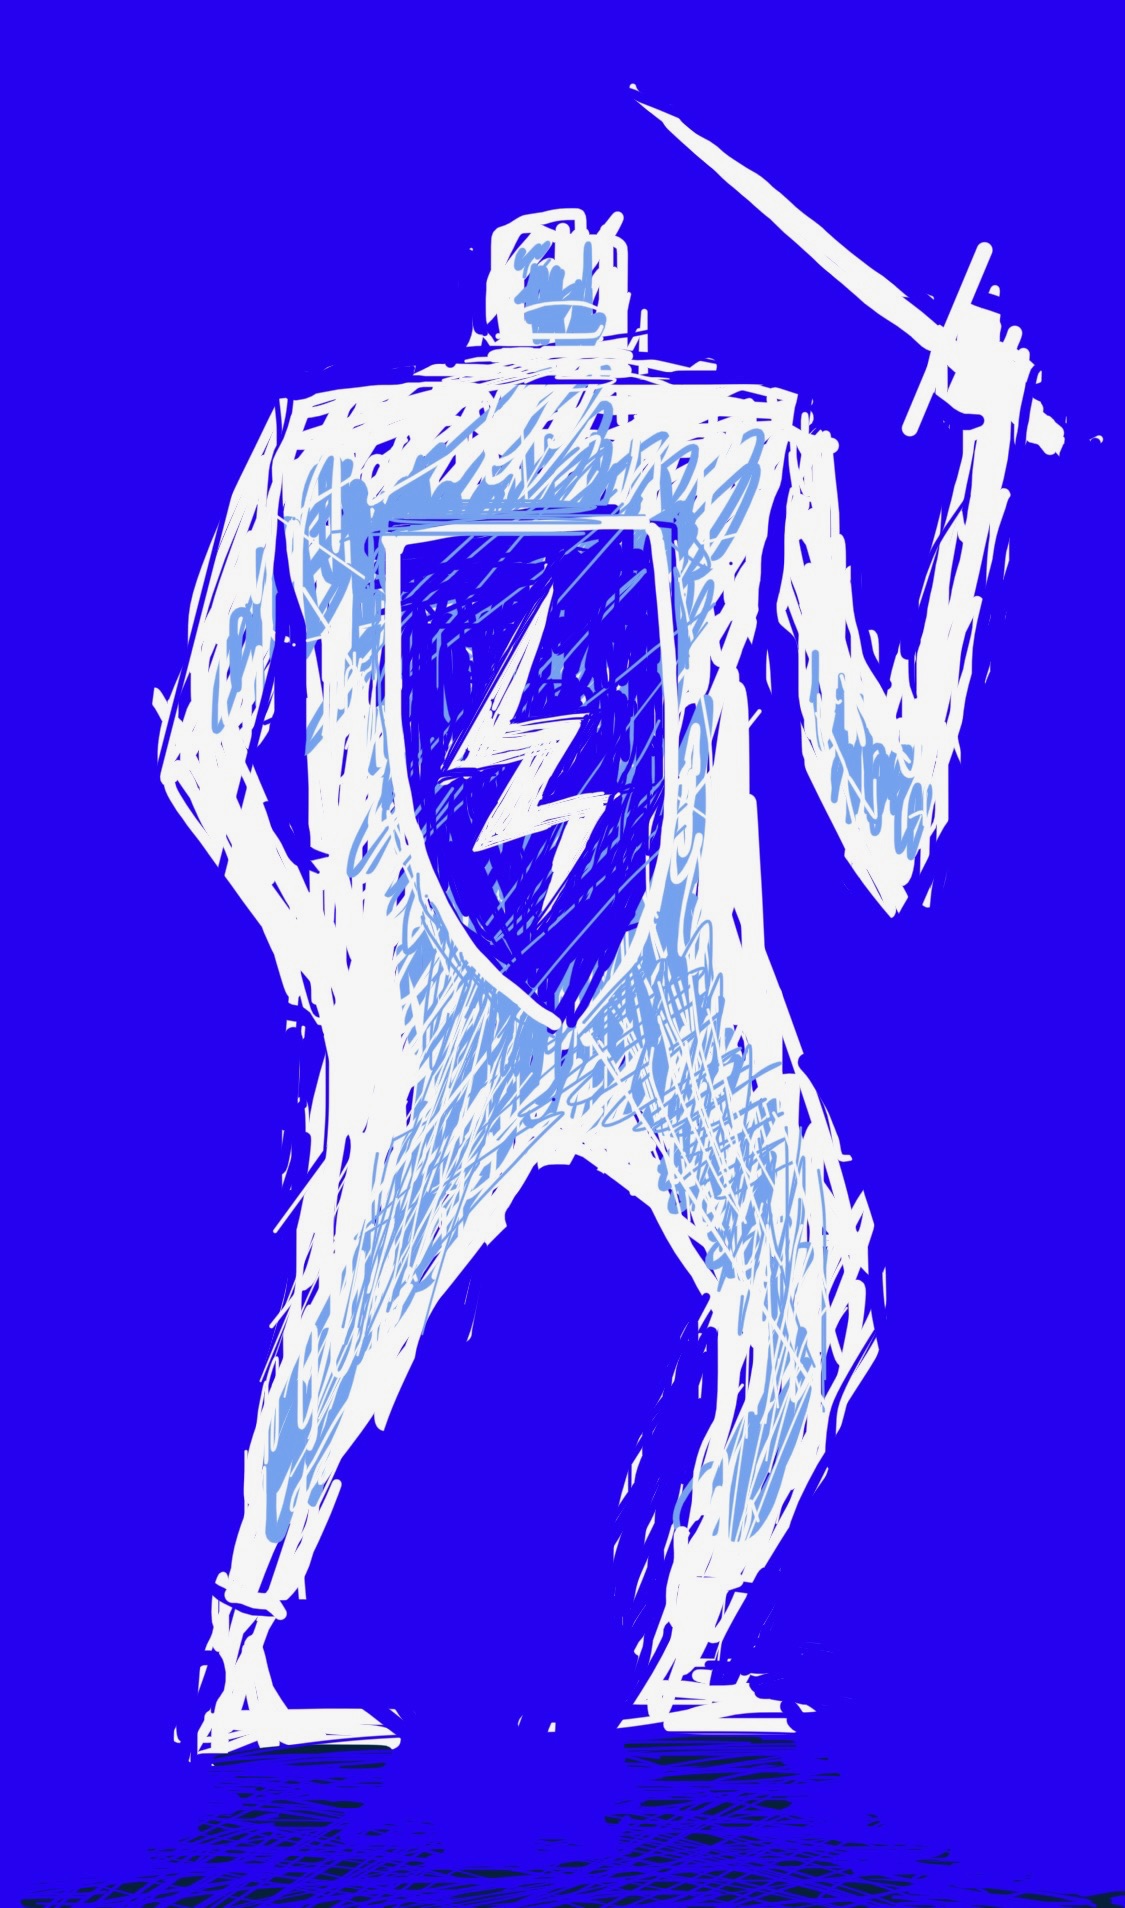 A person holding a sword. On the back of the person's shirt is a shield with a lightning bolt in it.